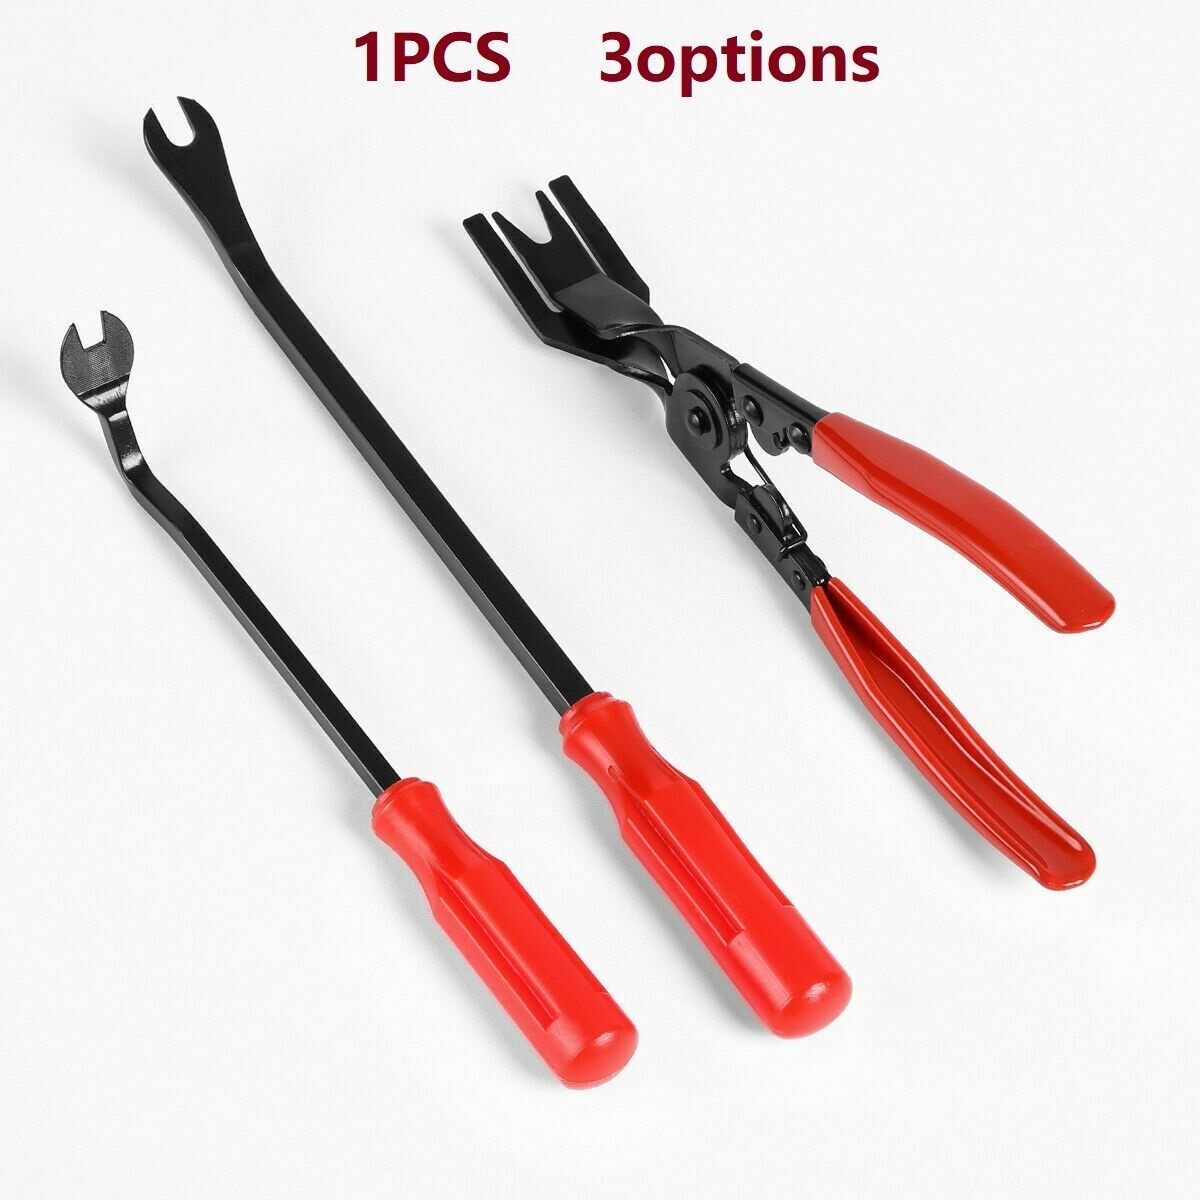 Comforhome 1PCS Cars Trim Clips Upholstery Removal Tool Door Panel